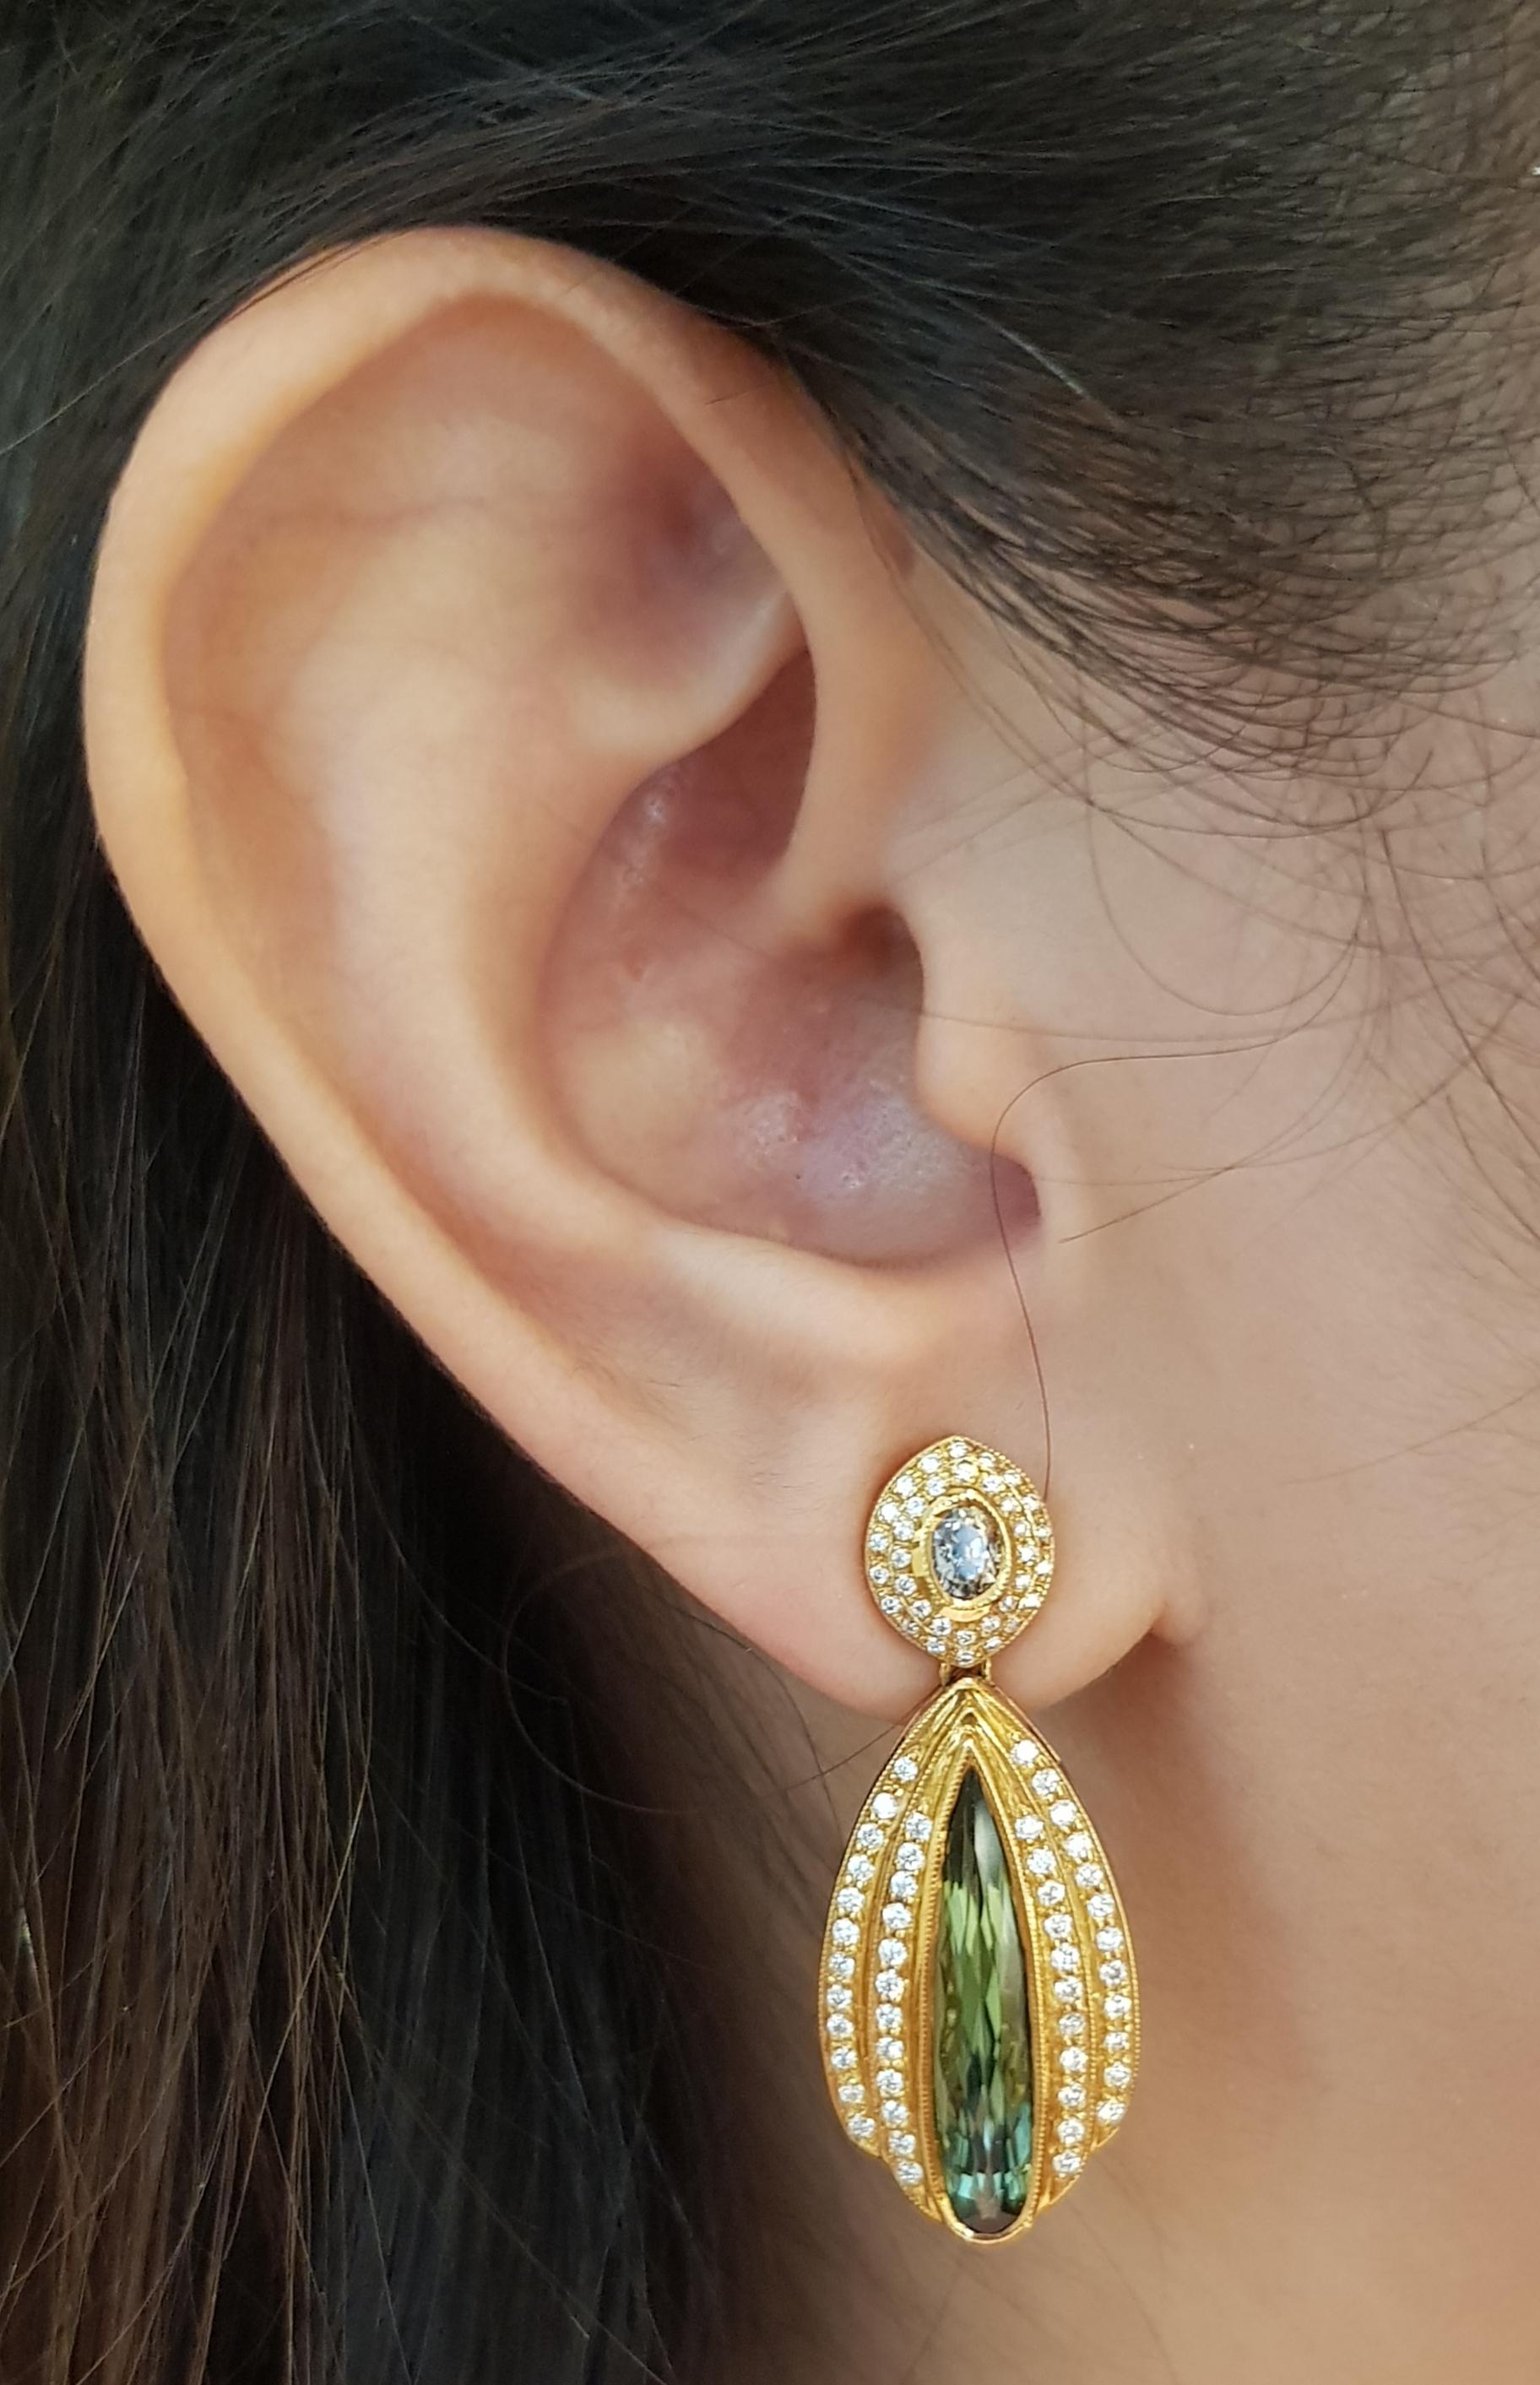 Green Tourmaline 3.99 carats with Brown Sapphire 0.57 carat and Diamond 0.72 carat Earrings set in 18 Karat Gold Settings

Width:  1.3 cm 
Length:  3.4 cm
Total Weight: 13.0 grams

